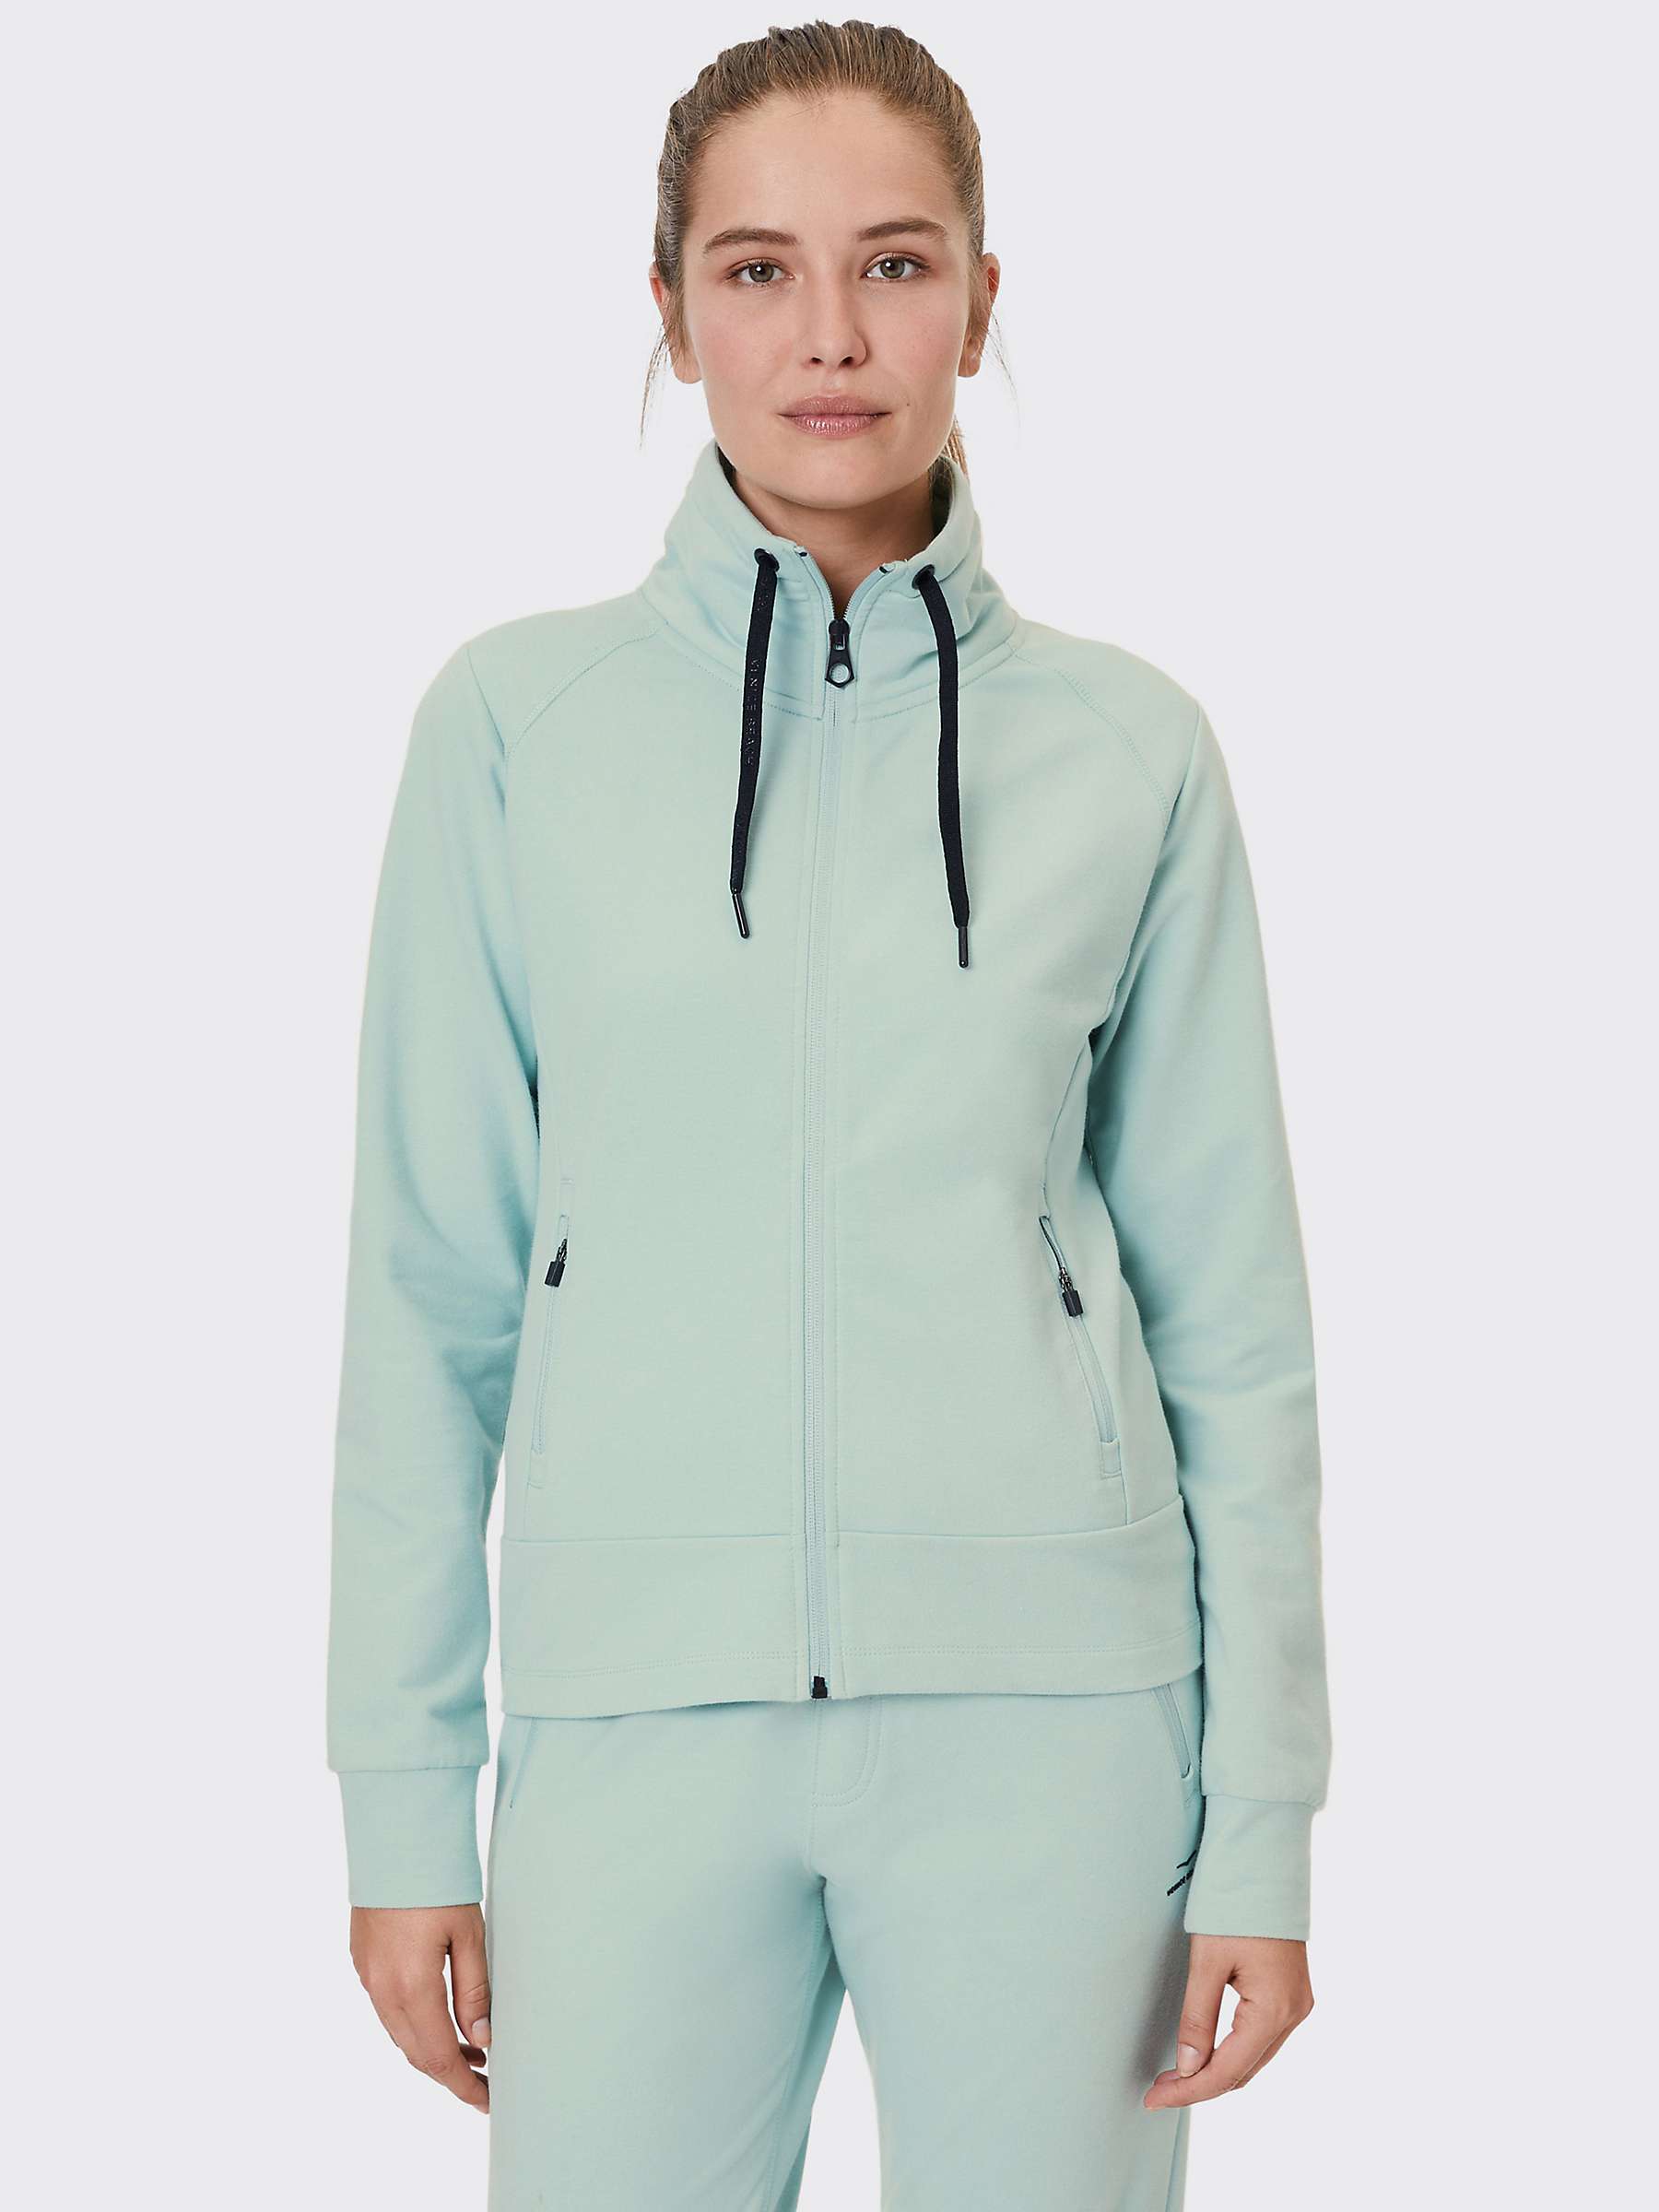 Buy Venice Beach Florence Sports Jacket Online at johnlewis.com